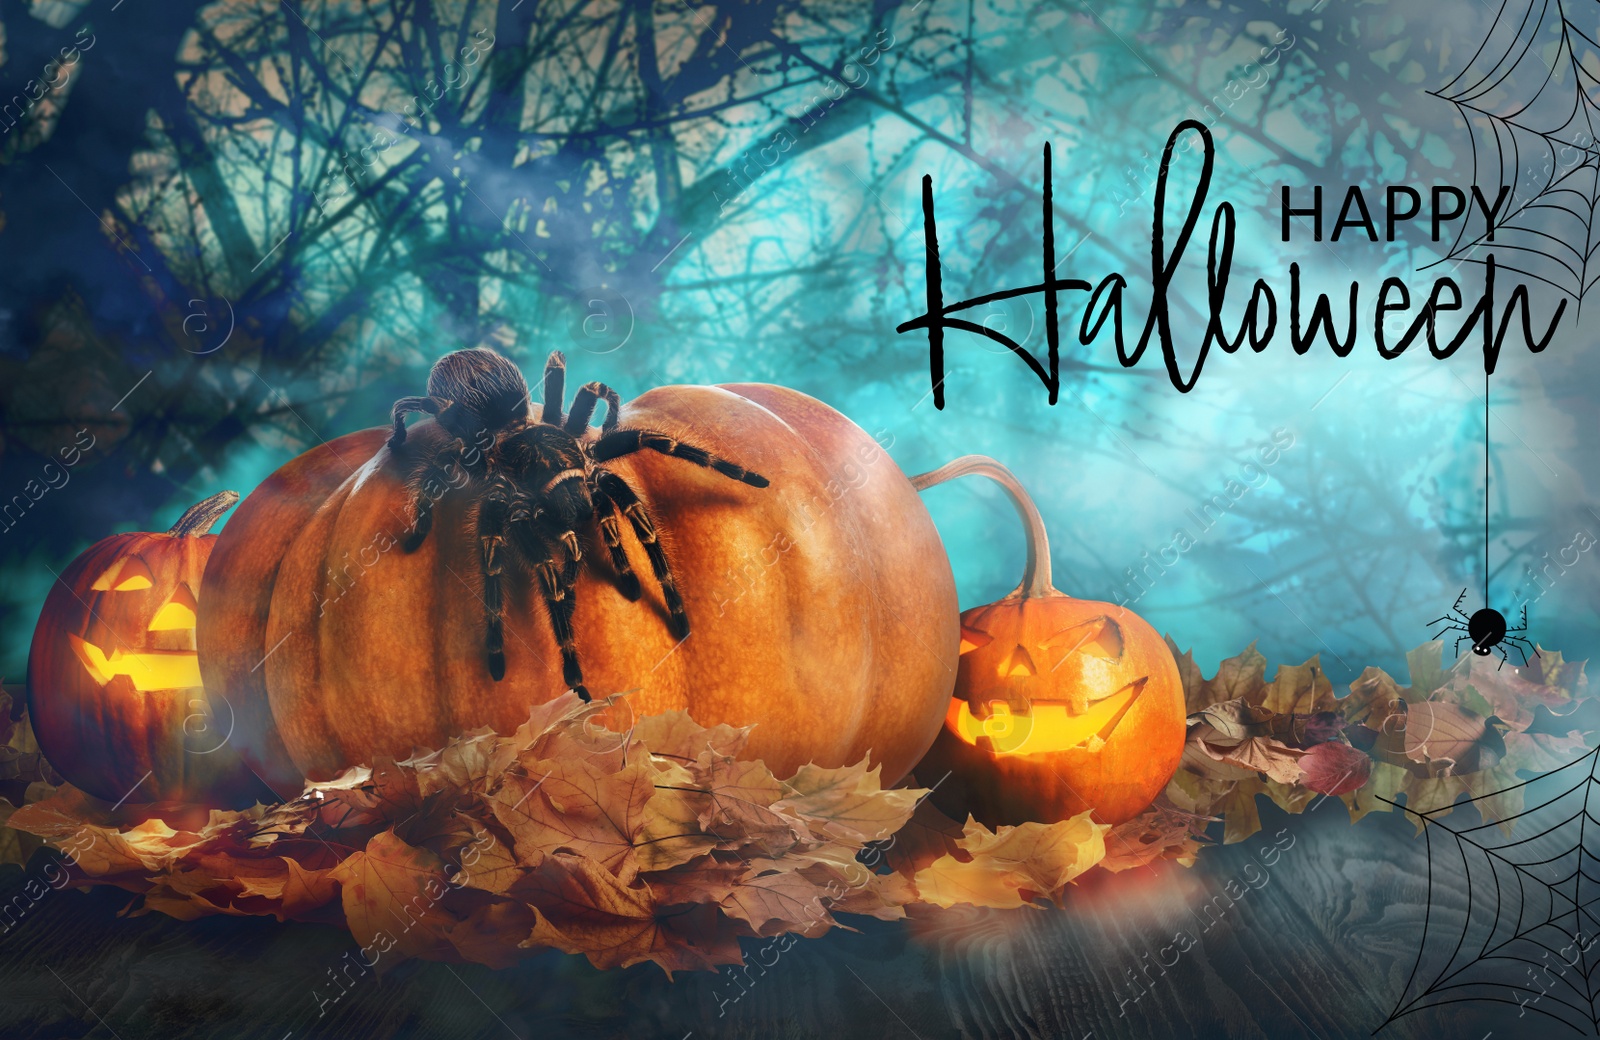 Image of Happy Halloween. Spooky Jack O`Lantern pumpkins and creepy spider surrounded by mystical fog in night